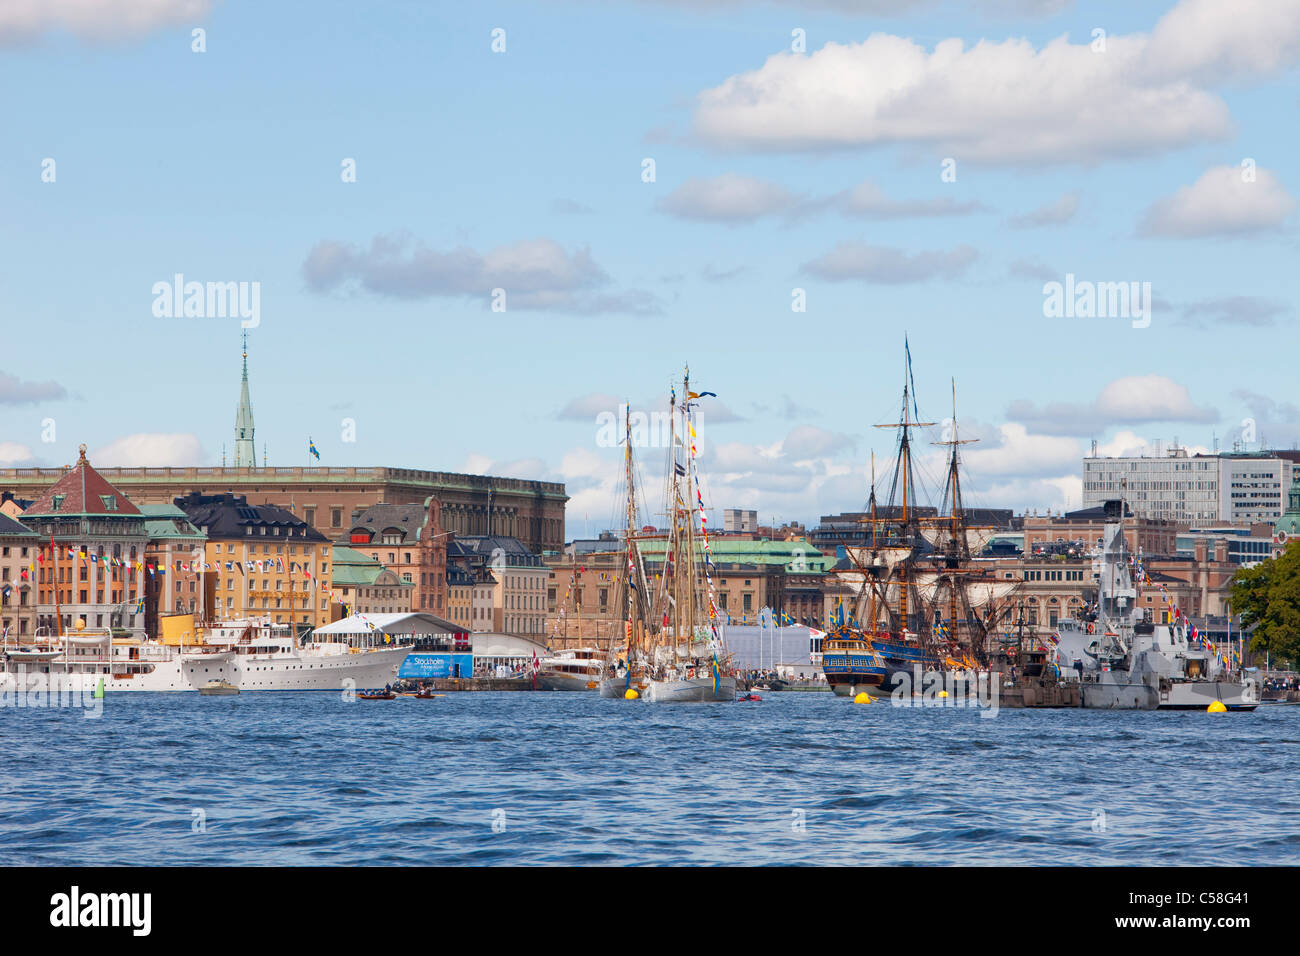 Boat, Boats, Cities, City, Cityscape, Cityscapes, Colour, Colour, Day, Daytime, Europe, Exterior, Gamla Stan, Horizontal, Island Stock Photo